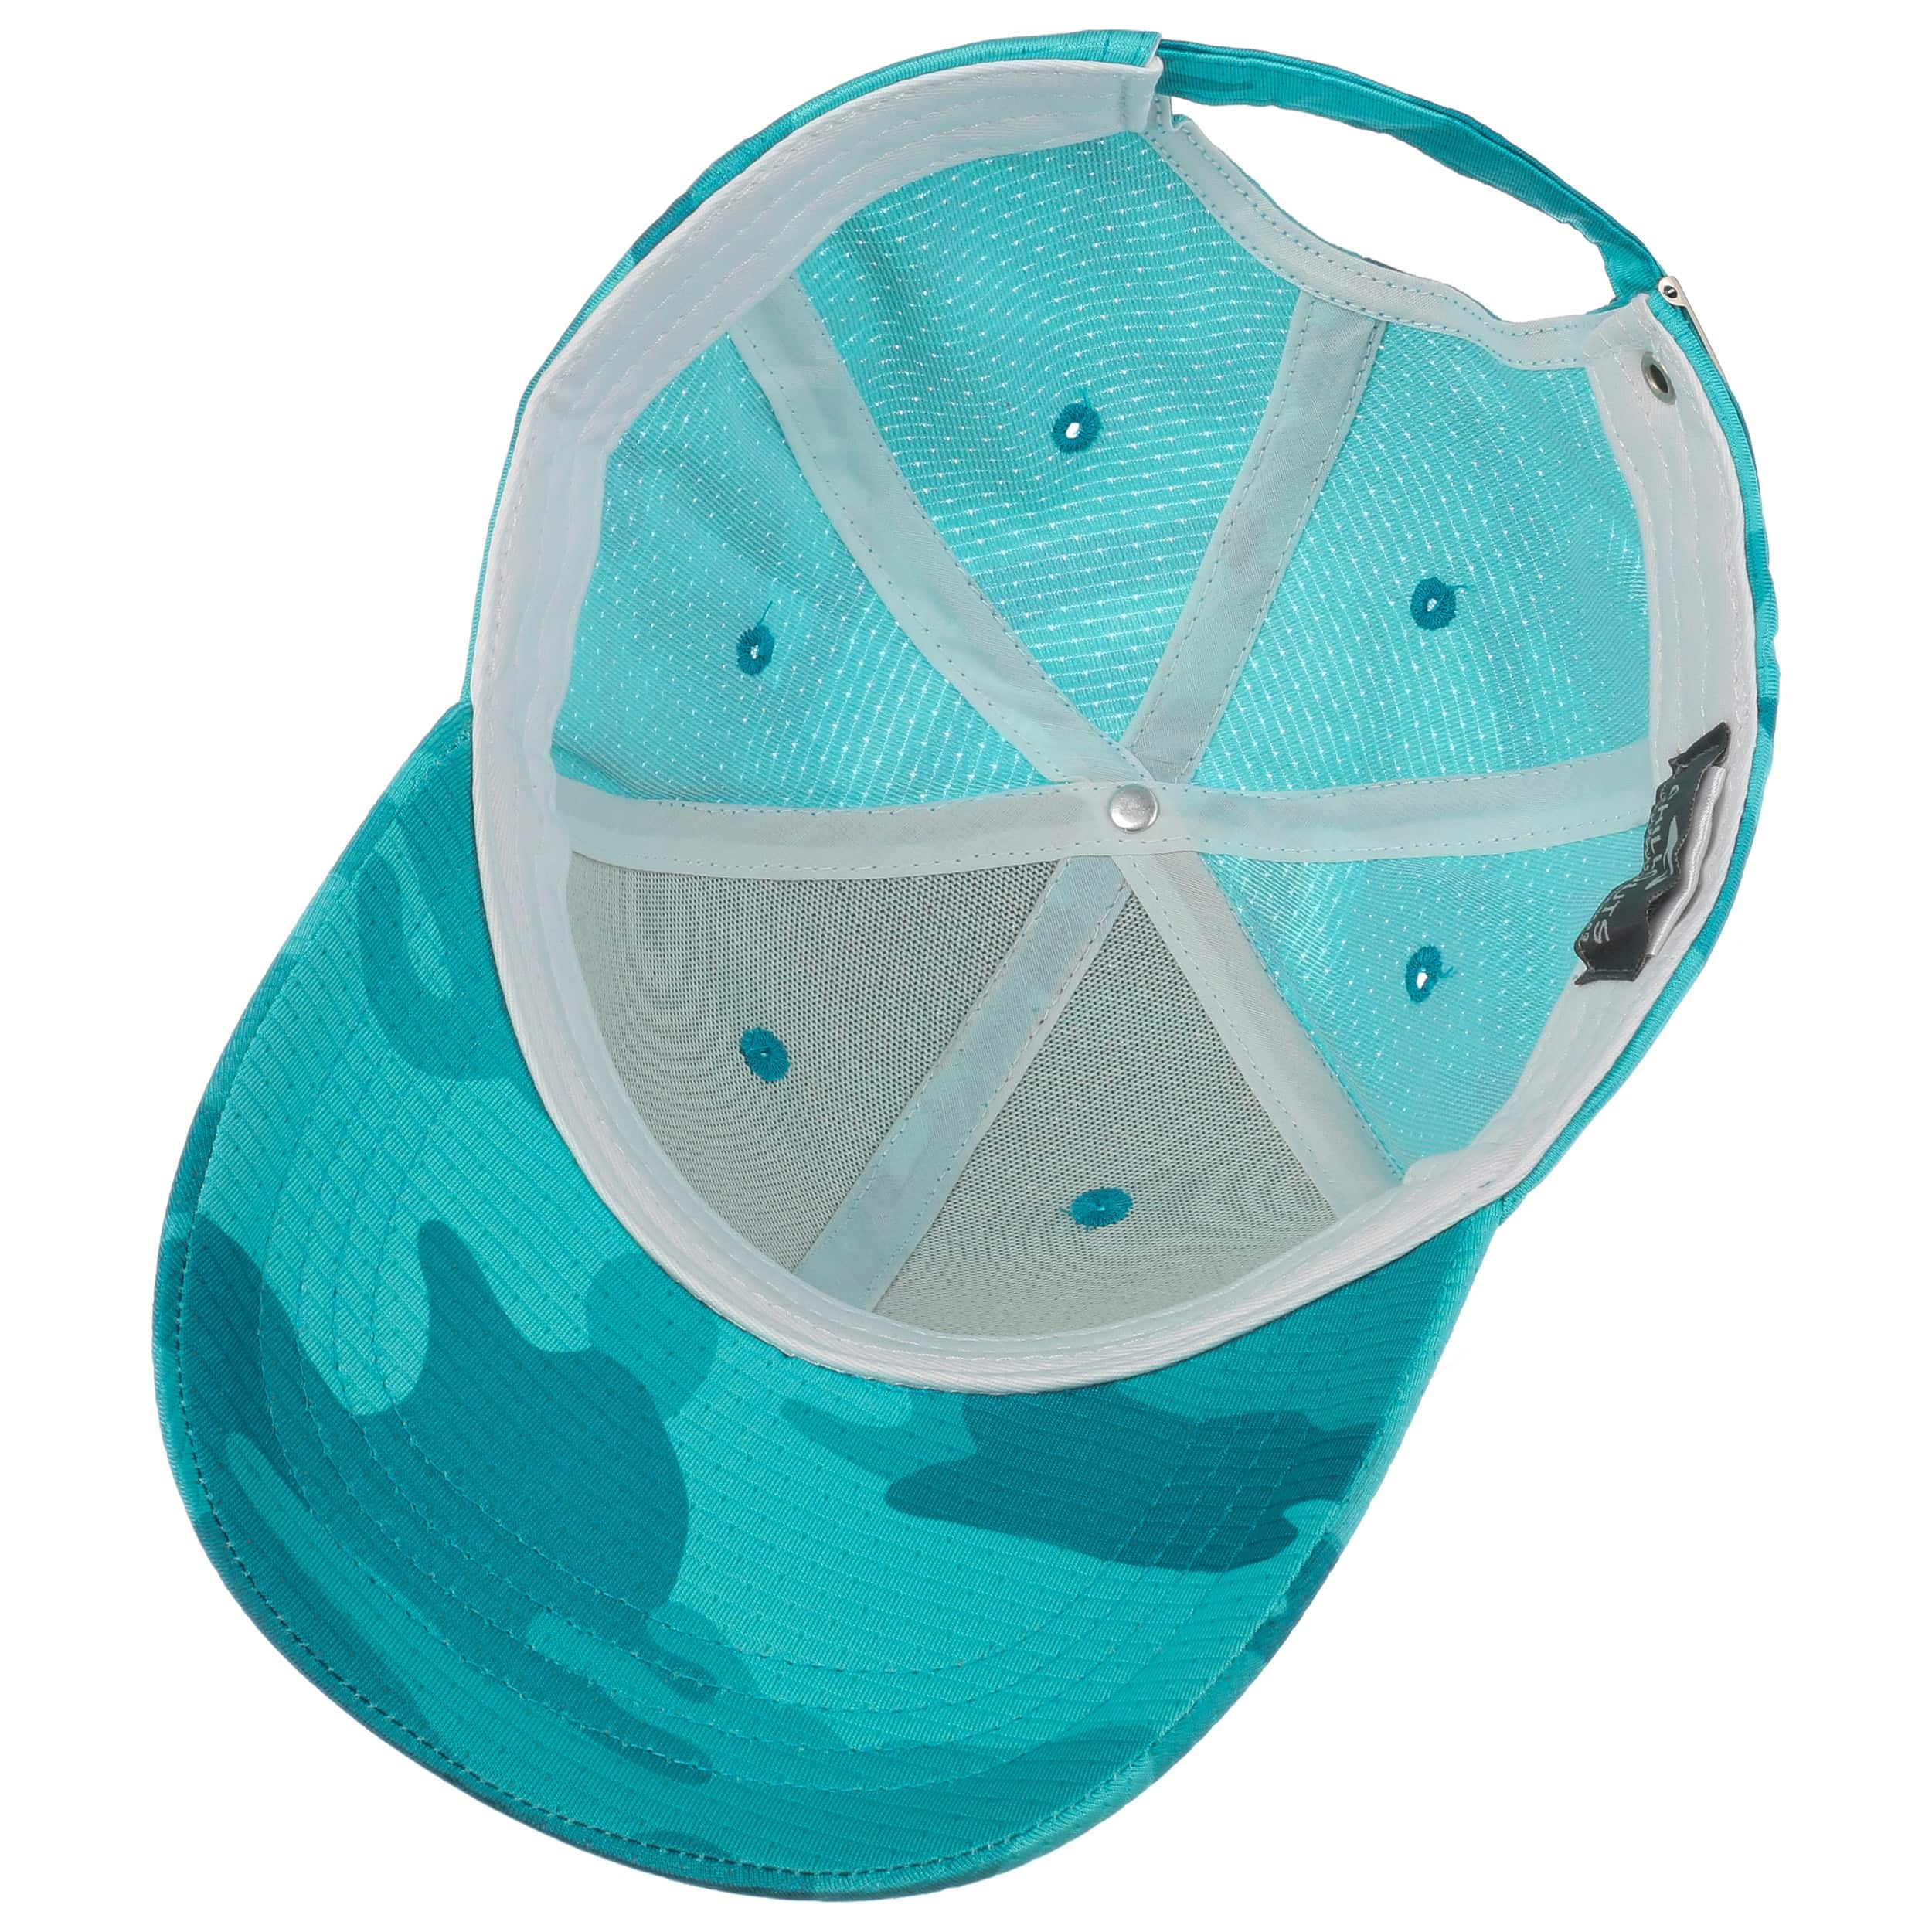 Kampala Camouflage Cap by Chillouts - 26,95 €